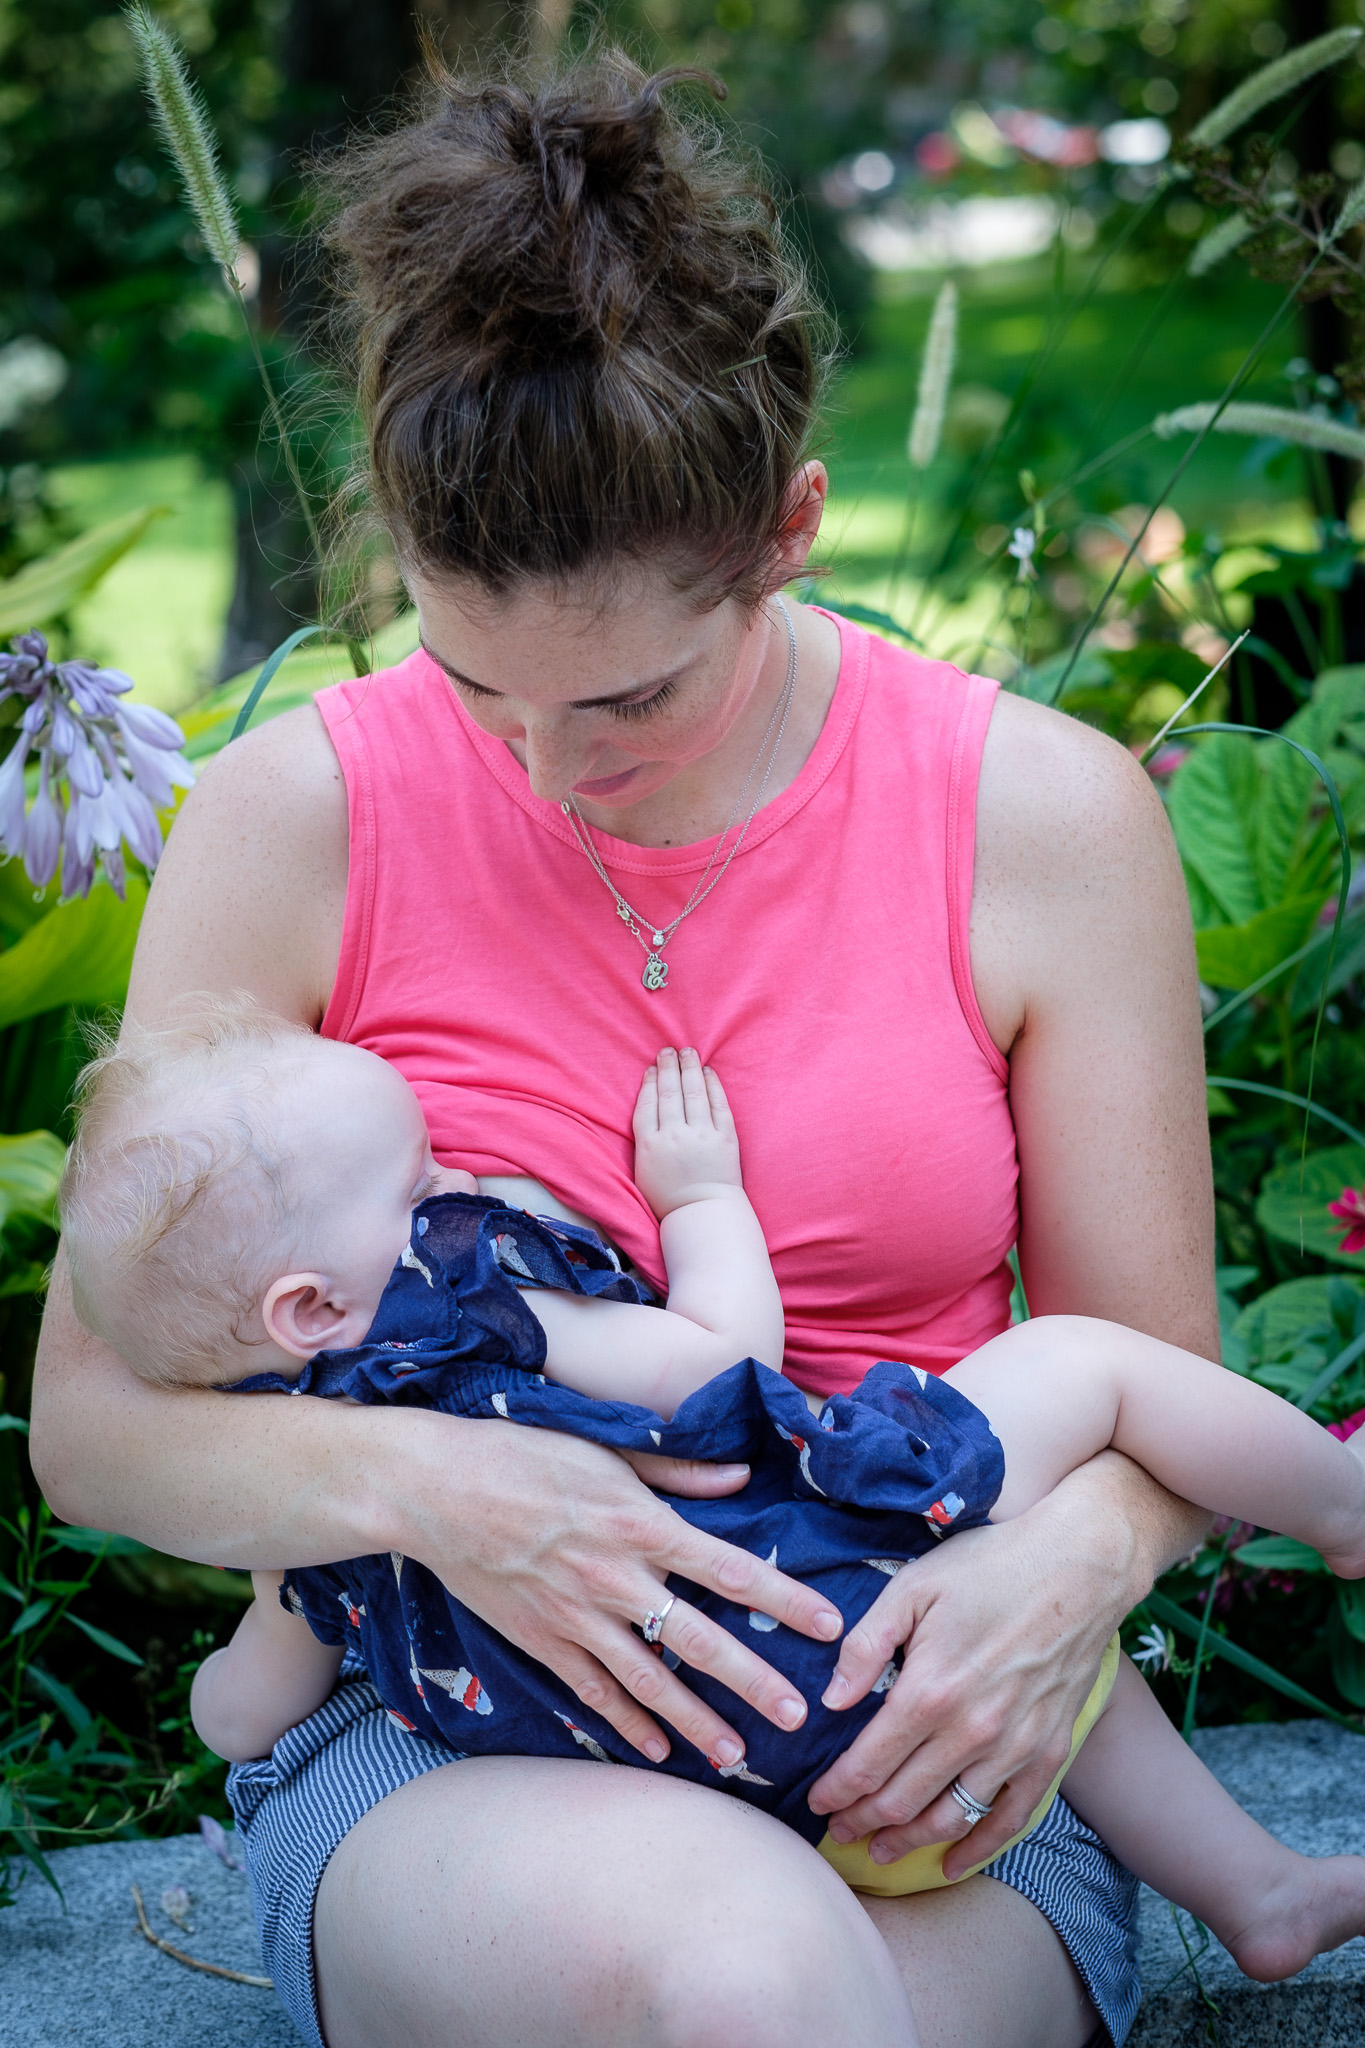  “To me, breastfeeding is a unique gift that only I can give to my child. It forces me to slow down, snuggle her, and enjoy her precious little face.” ~ Kim and her daughter Rose 